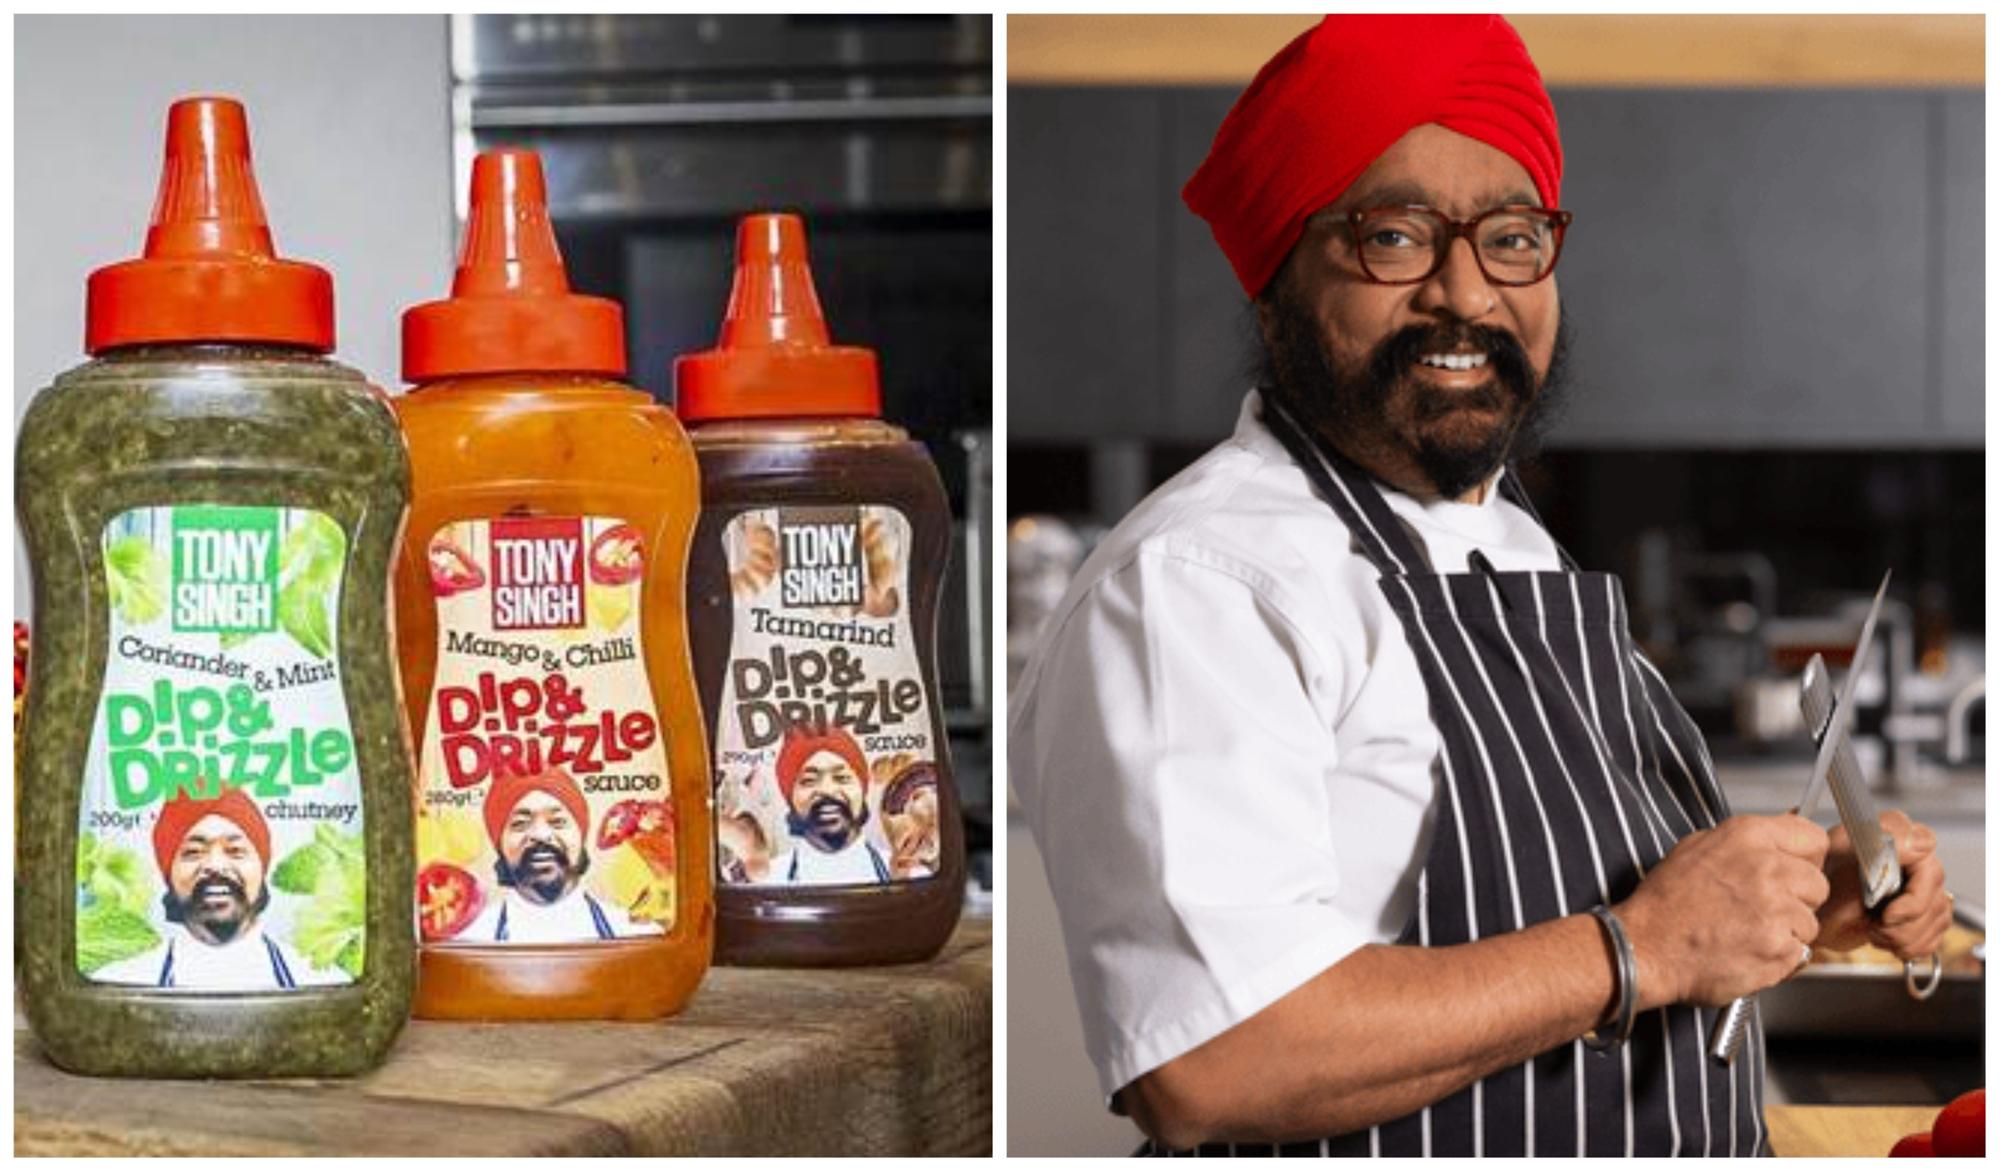 edinburgh celebrity chef tony singh encouraging foodies to dip & drizzle with his very own range of sauces